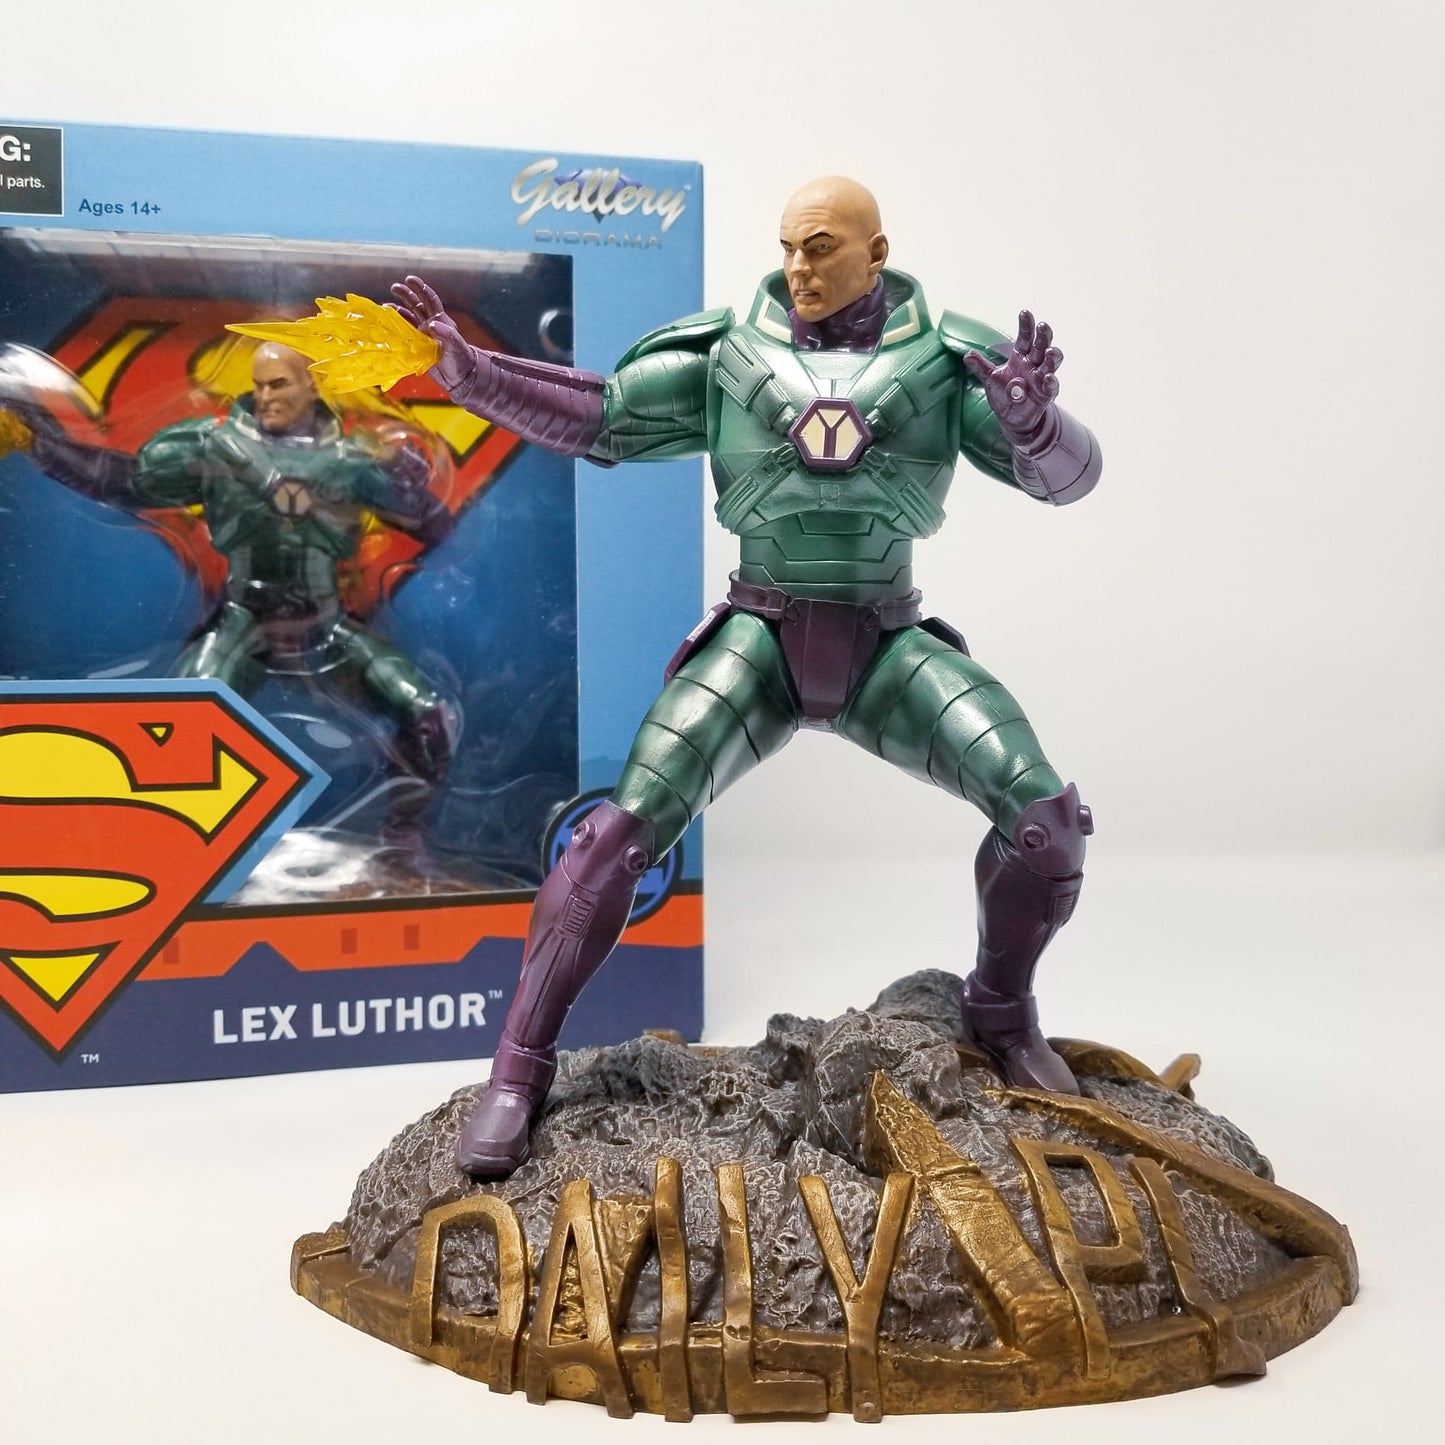 Load image into Gallery viewer, Lex Luthor DC Gallery Statue Destroy Superman!  A Diamond Select Toys release! Lex Luthor dons his powerful armor to take on Superman in this DC Comics-inspired Gallery Diorama!  Raising his hand to fire a Kryptonite-fueled blast, this Lex Luthor sculpture measures approximately 9 inches tall.
